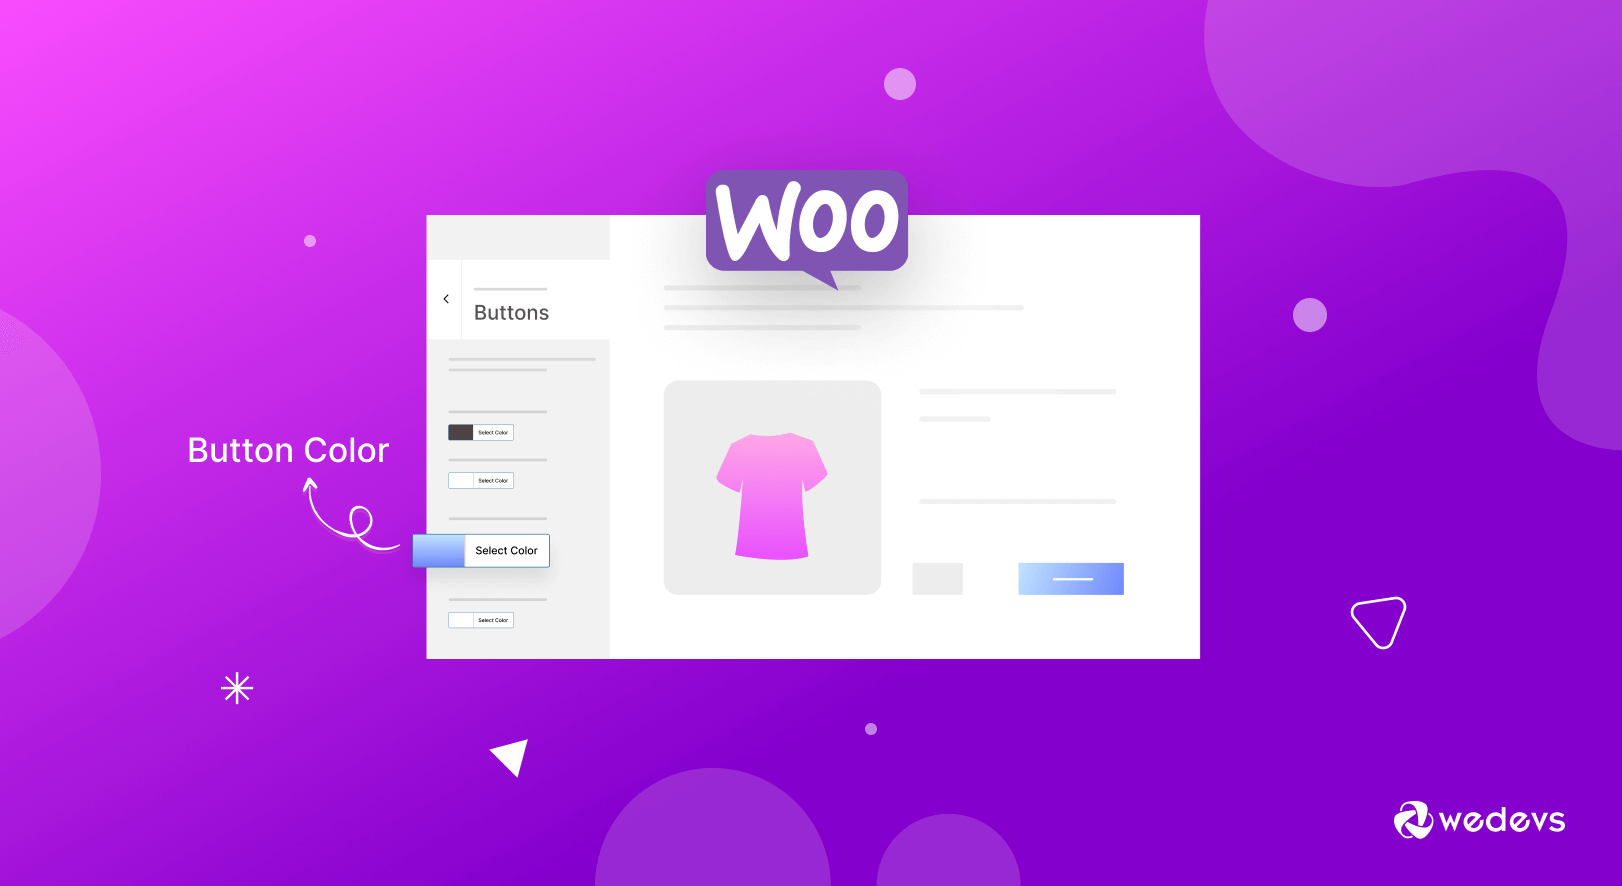 How to Customize Your WooCommerce Product Button and Price Color- The Easy Way